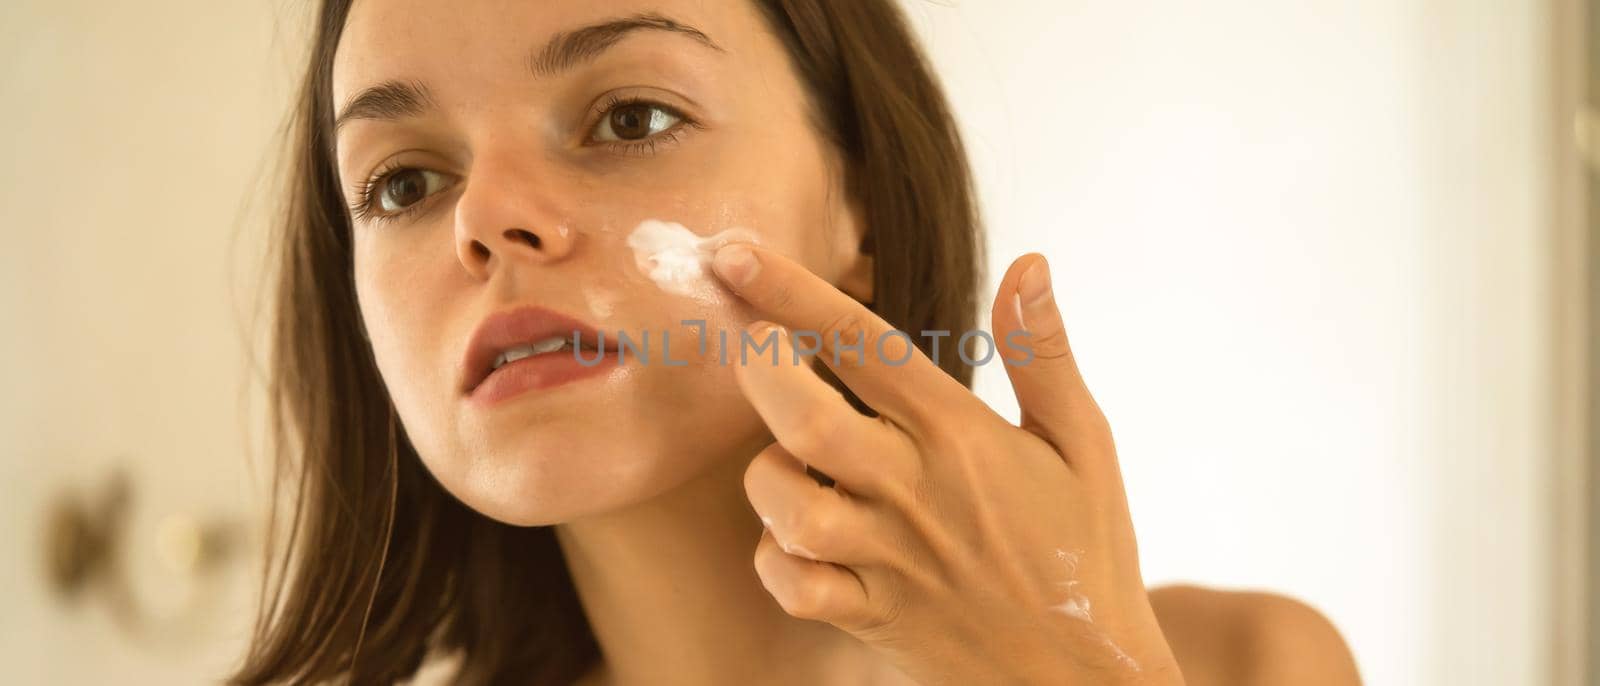 A young girl takes care of the health and beauty of her skin, a woman applies a moisturizing day cream on her face in the bathroom.